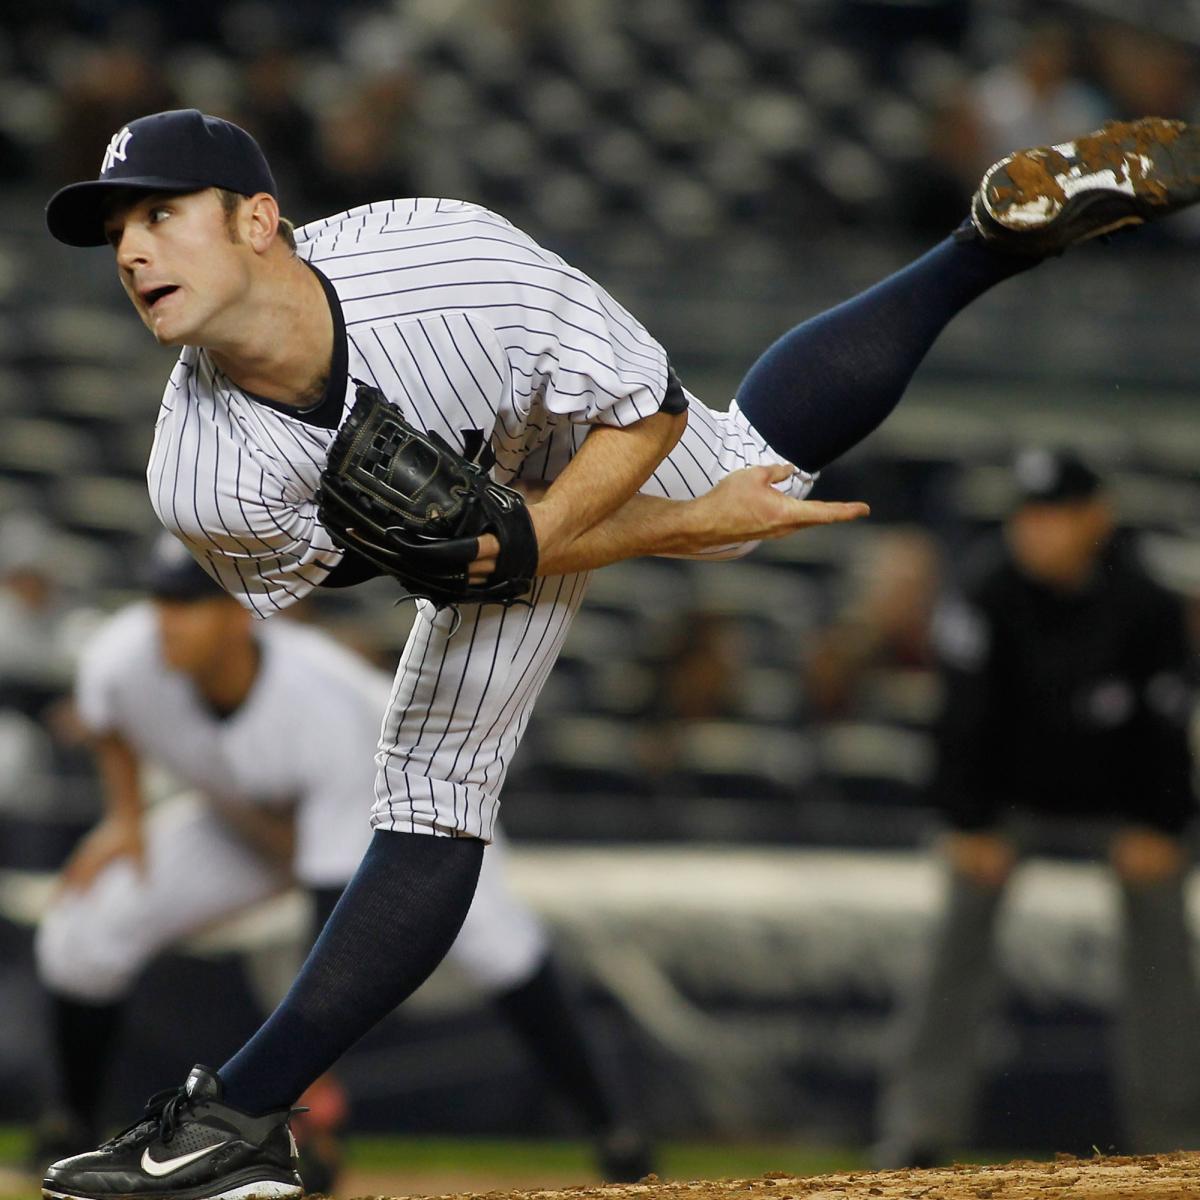 Will New York Yankees Miss Playoffs If David Robertson Does Not Shine